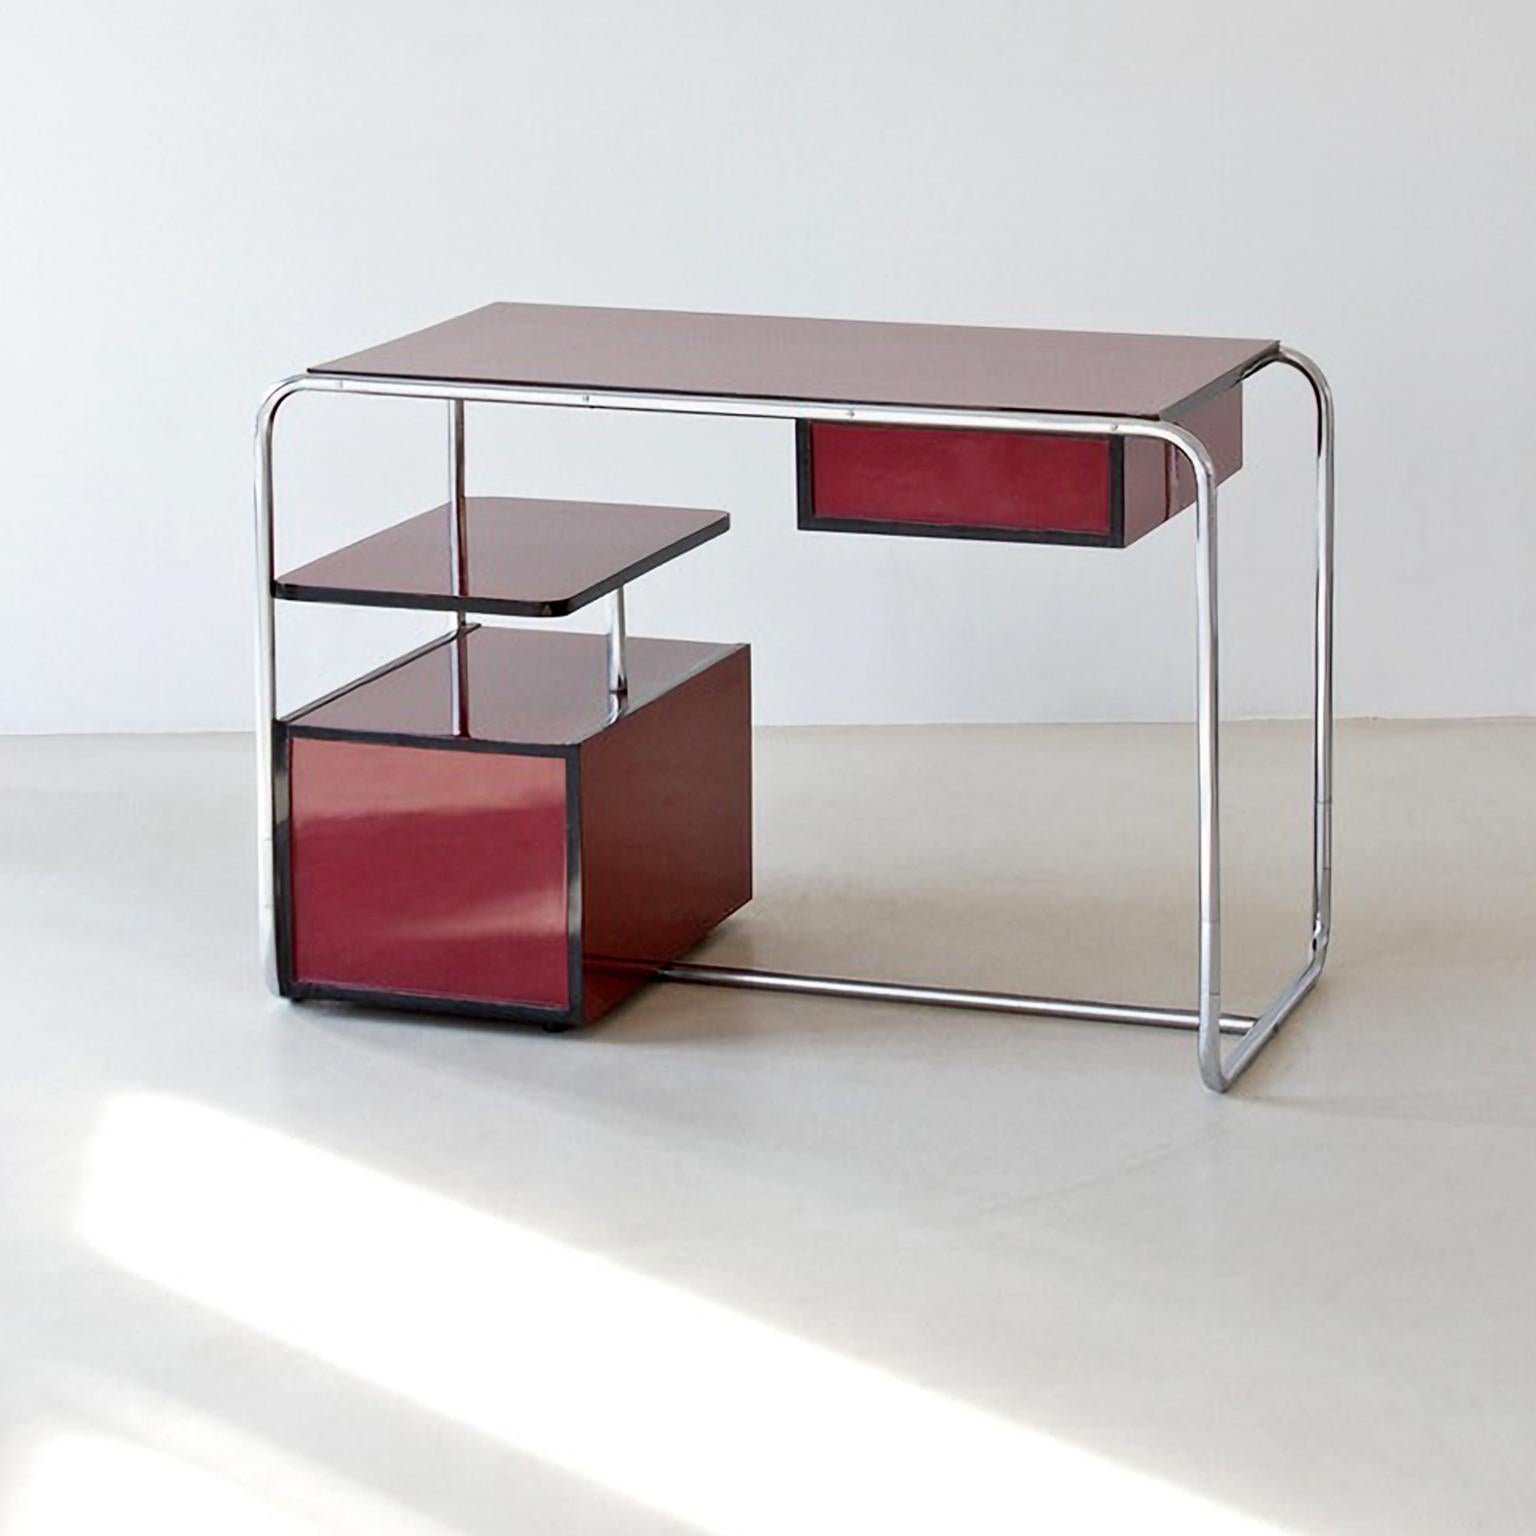 Modernist Tubular Steel Desk, Glossy Lacquered Wood, Plated Metal, Customizable For Sale 1